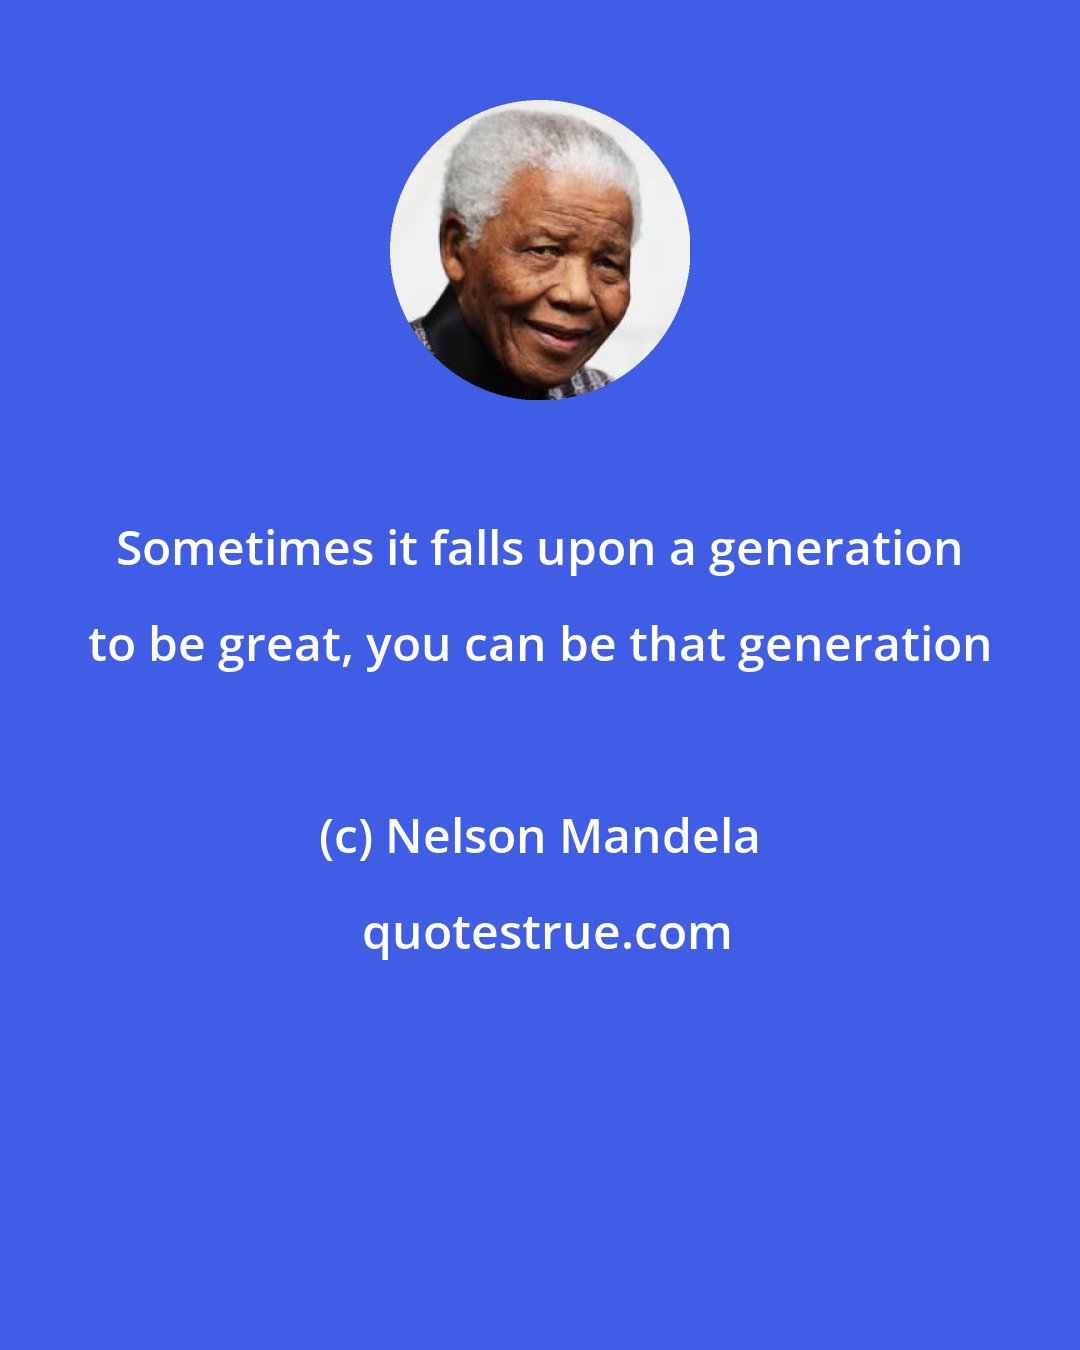 Nelson Mandela: Sometimes it falls upon a generation to be great, you can be that generation